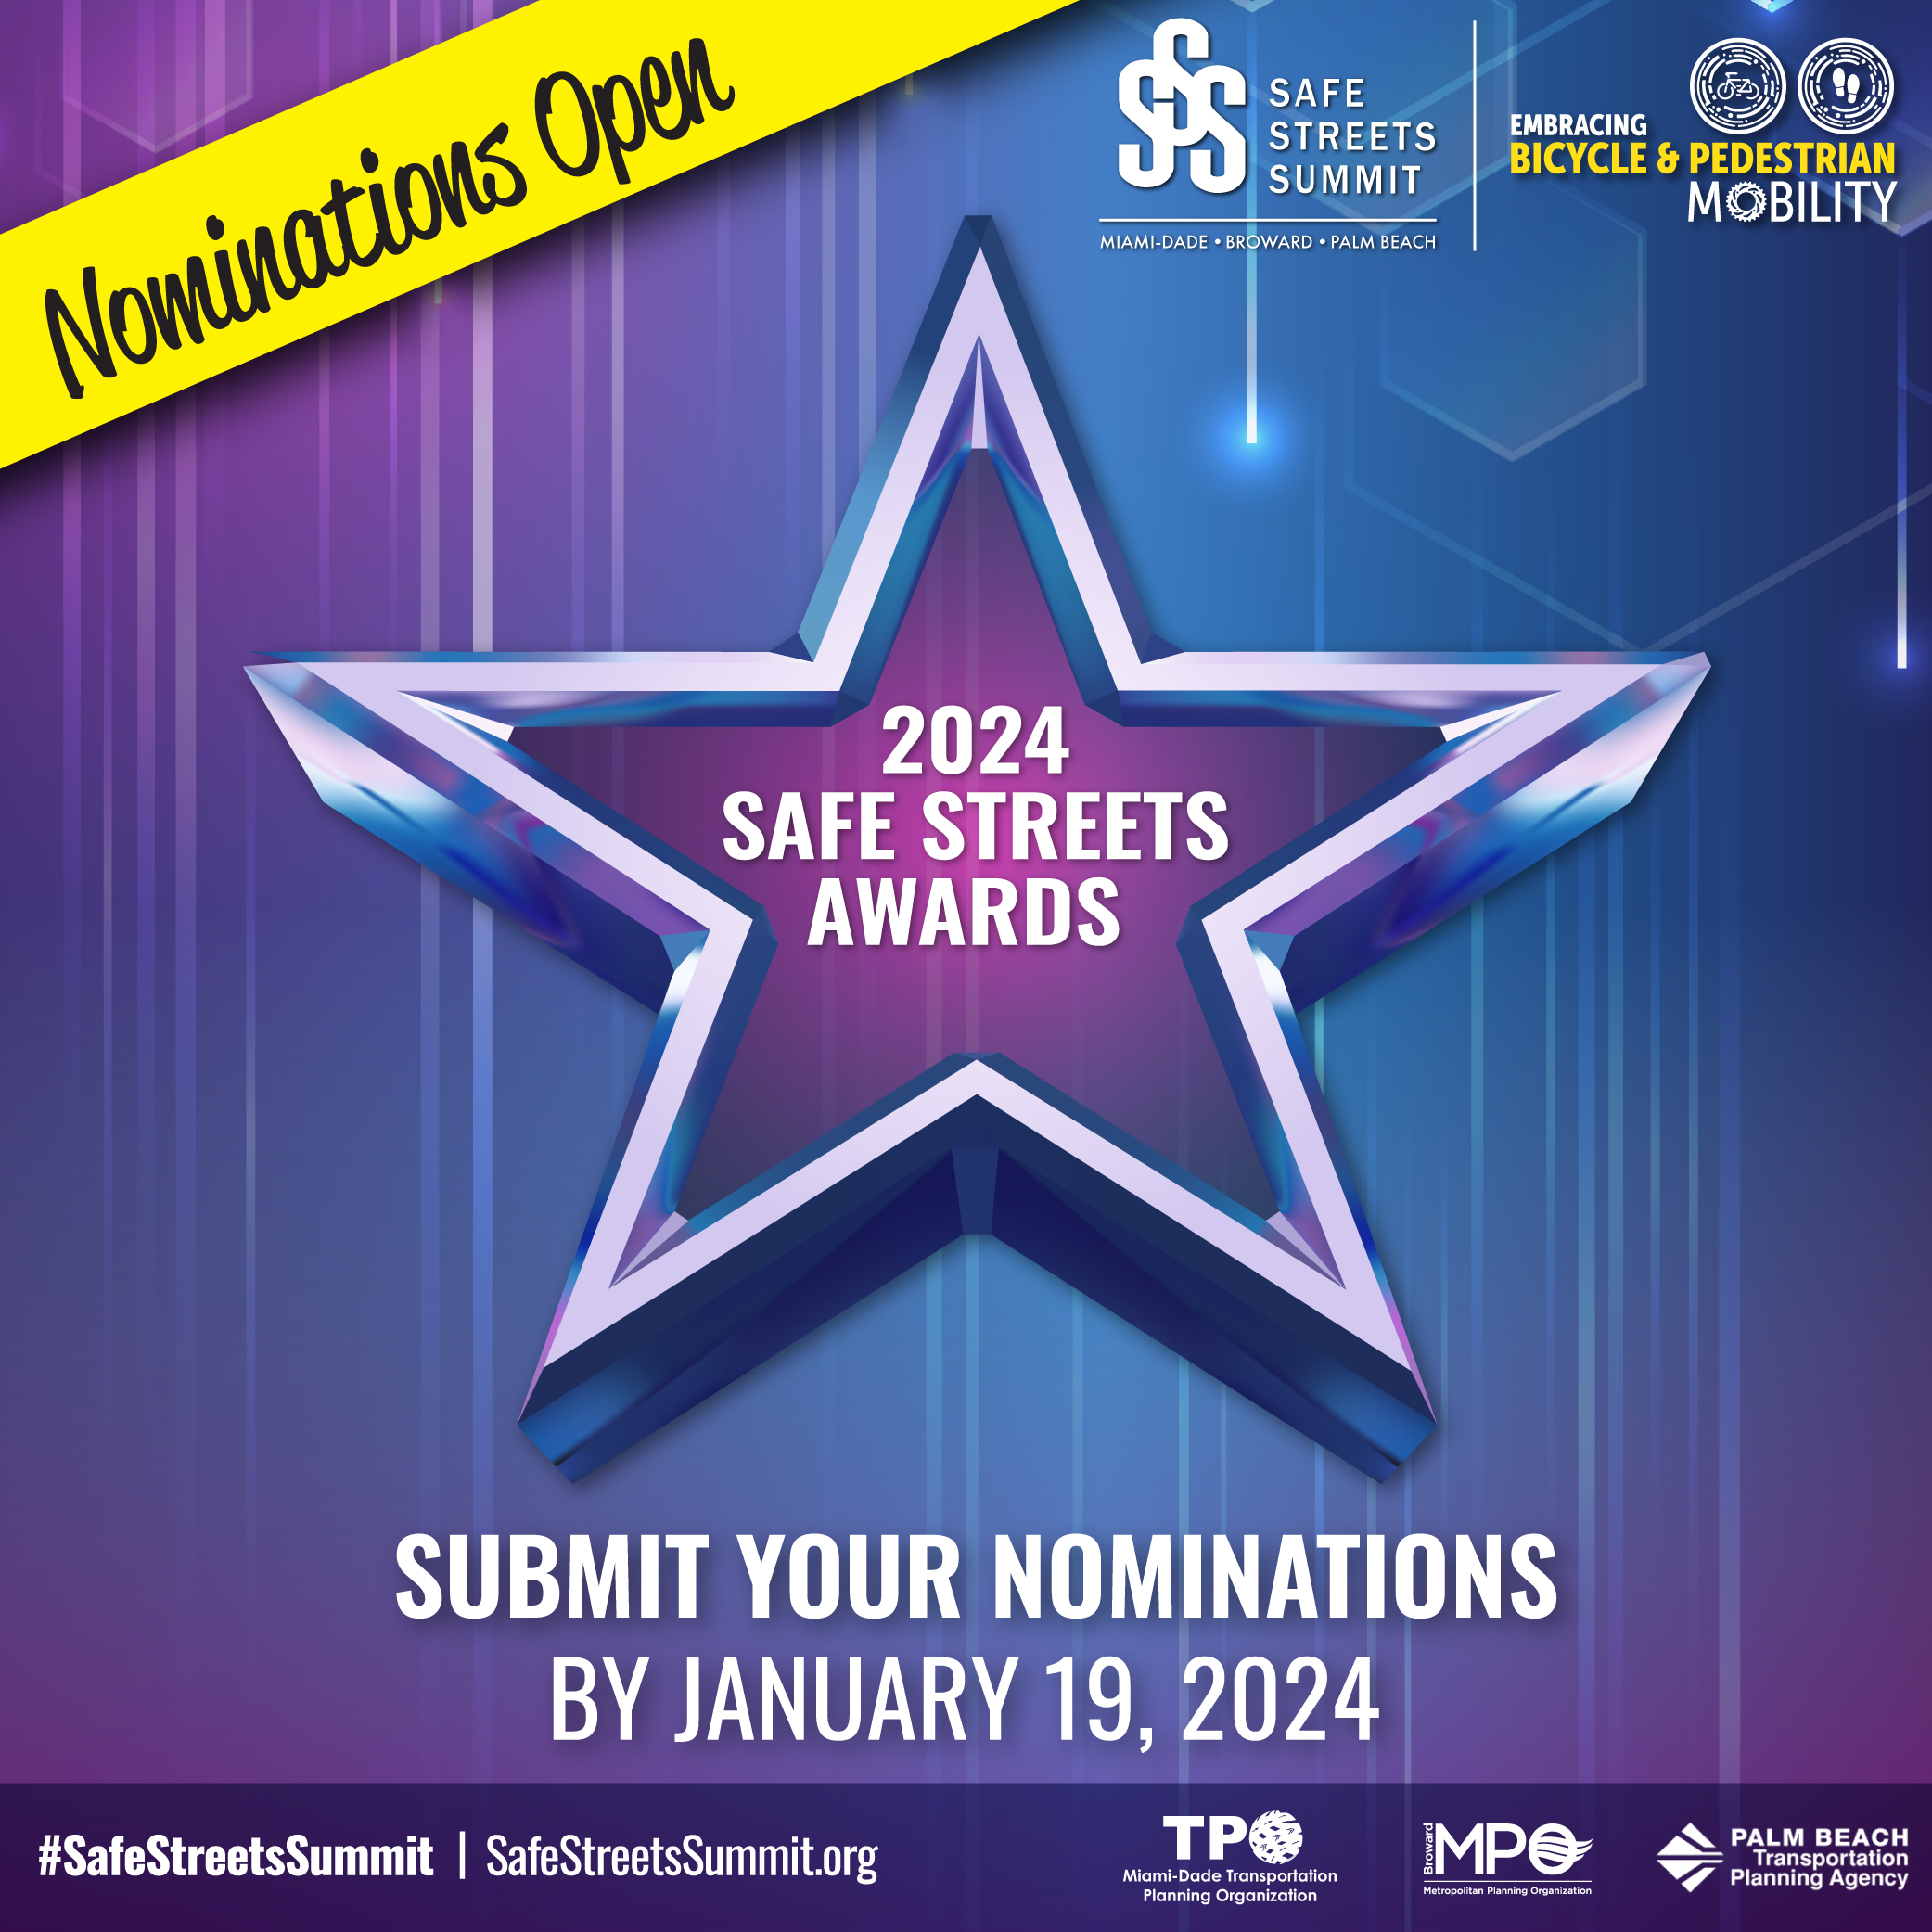 Safe Streets Awards Nominations Opening Soon!